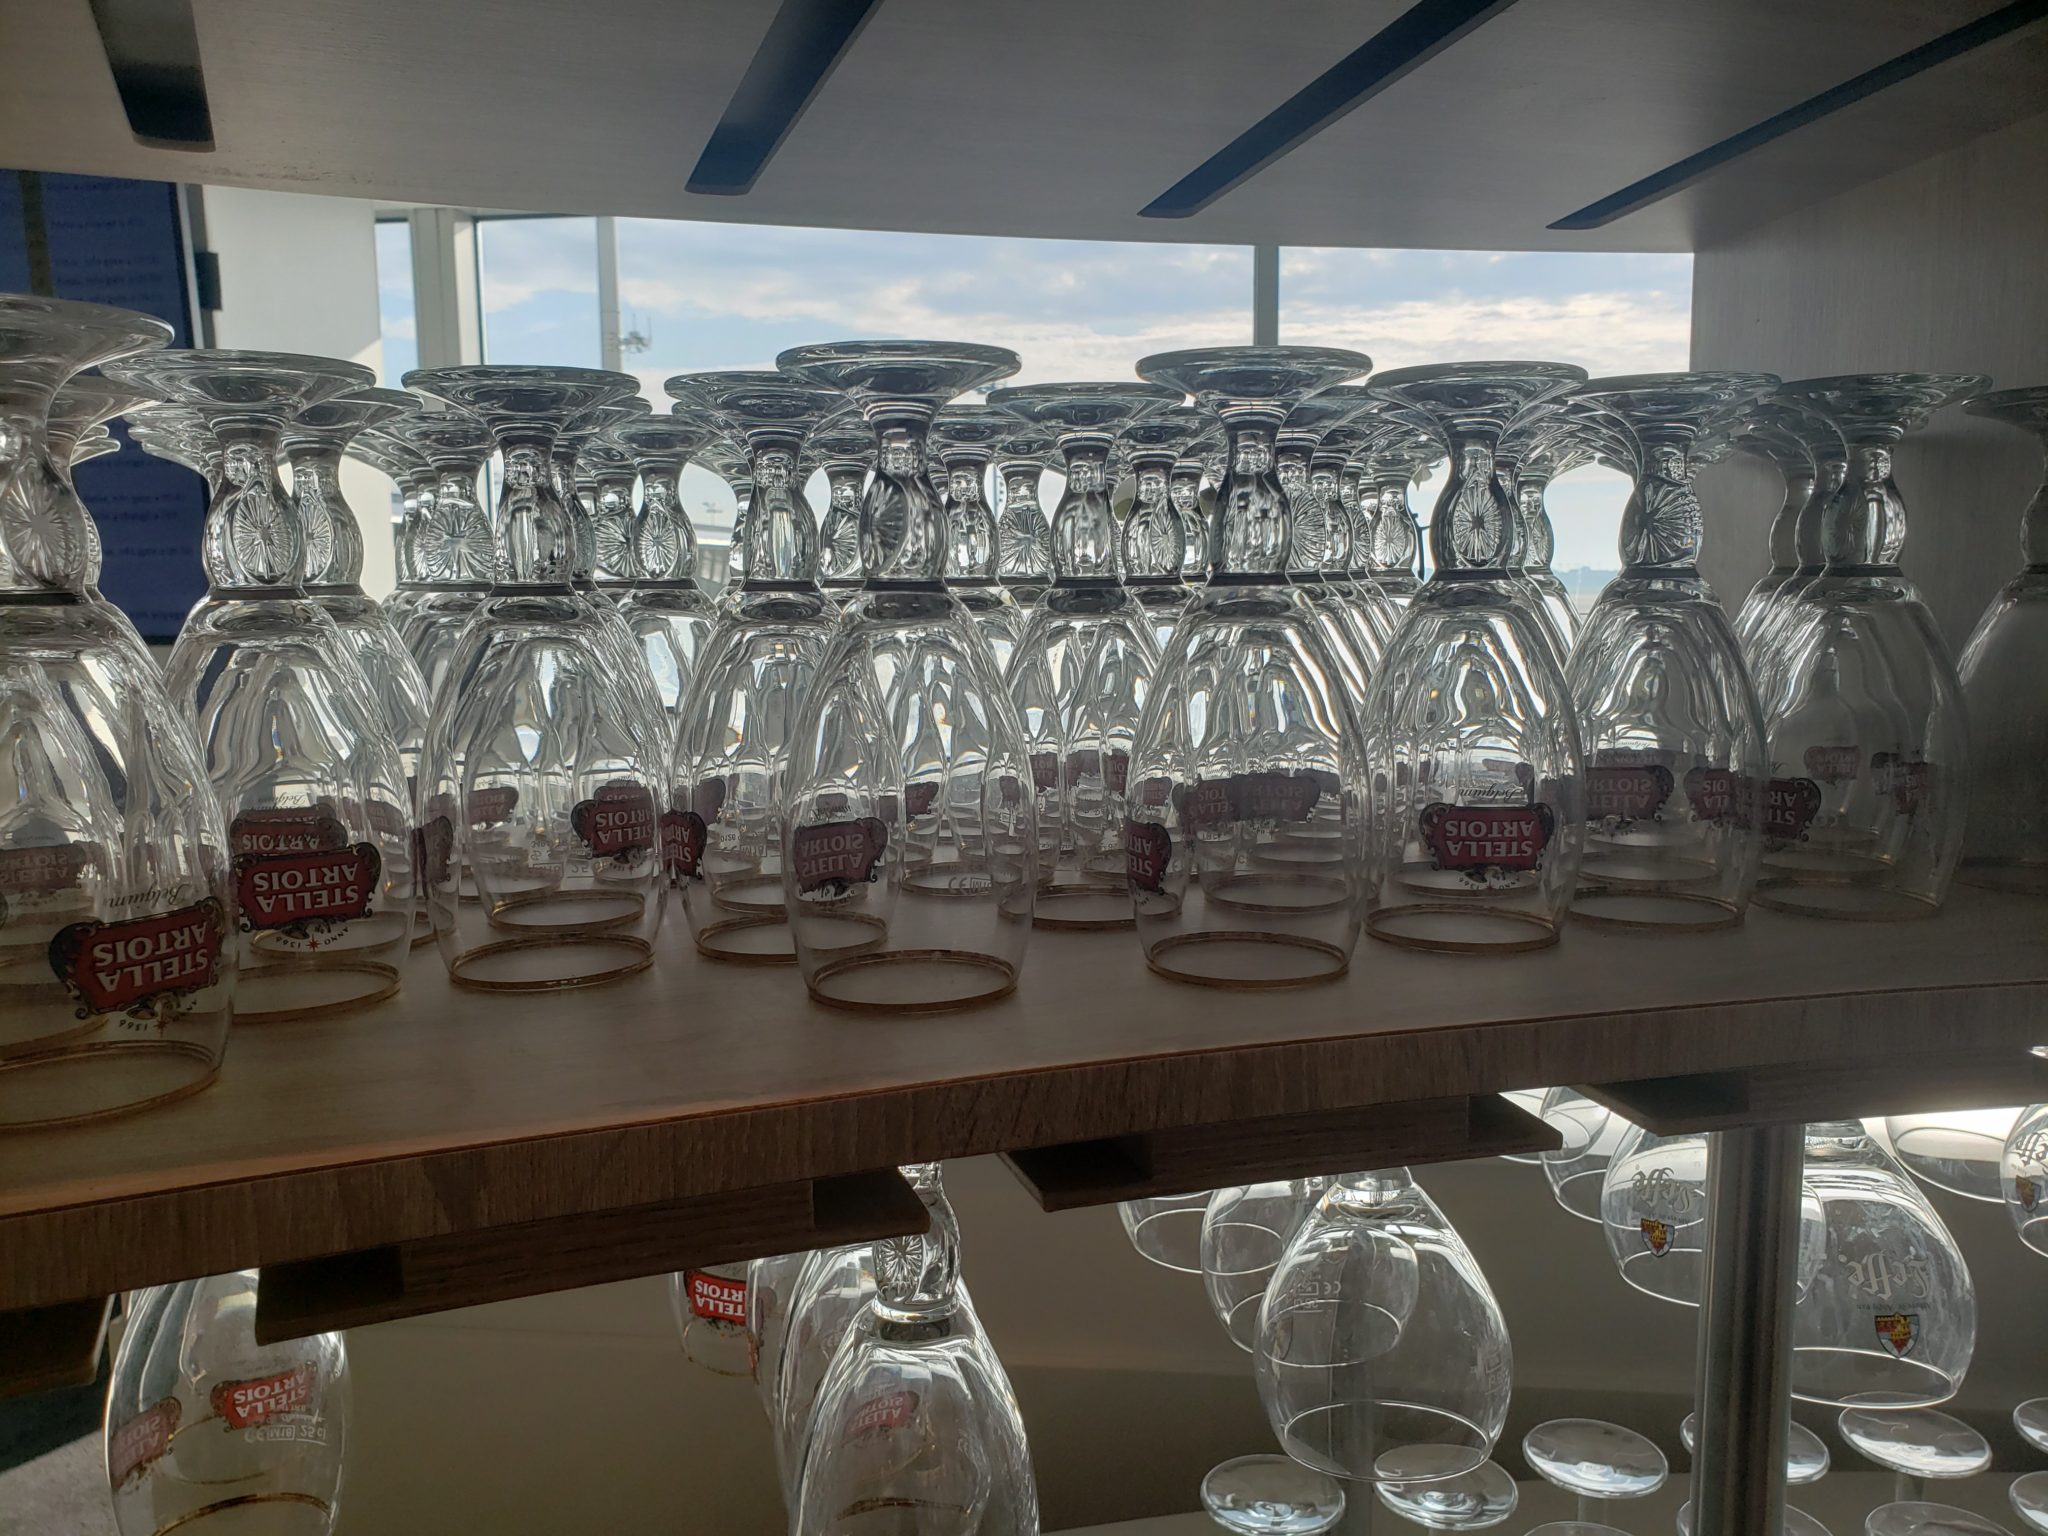 a shelf with many glasses on it